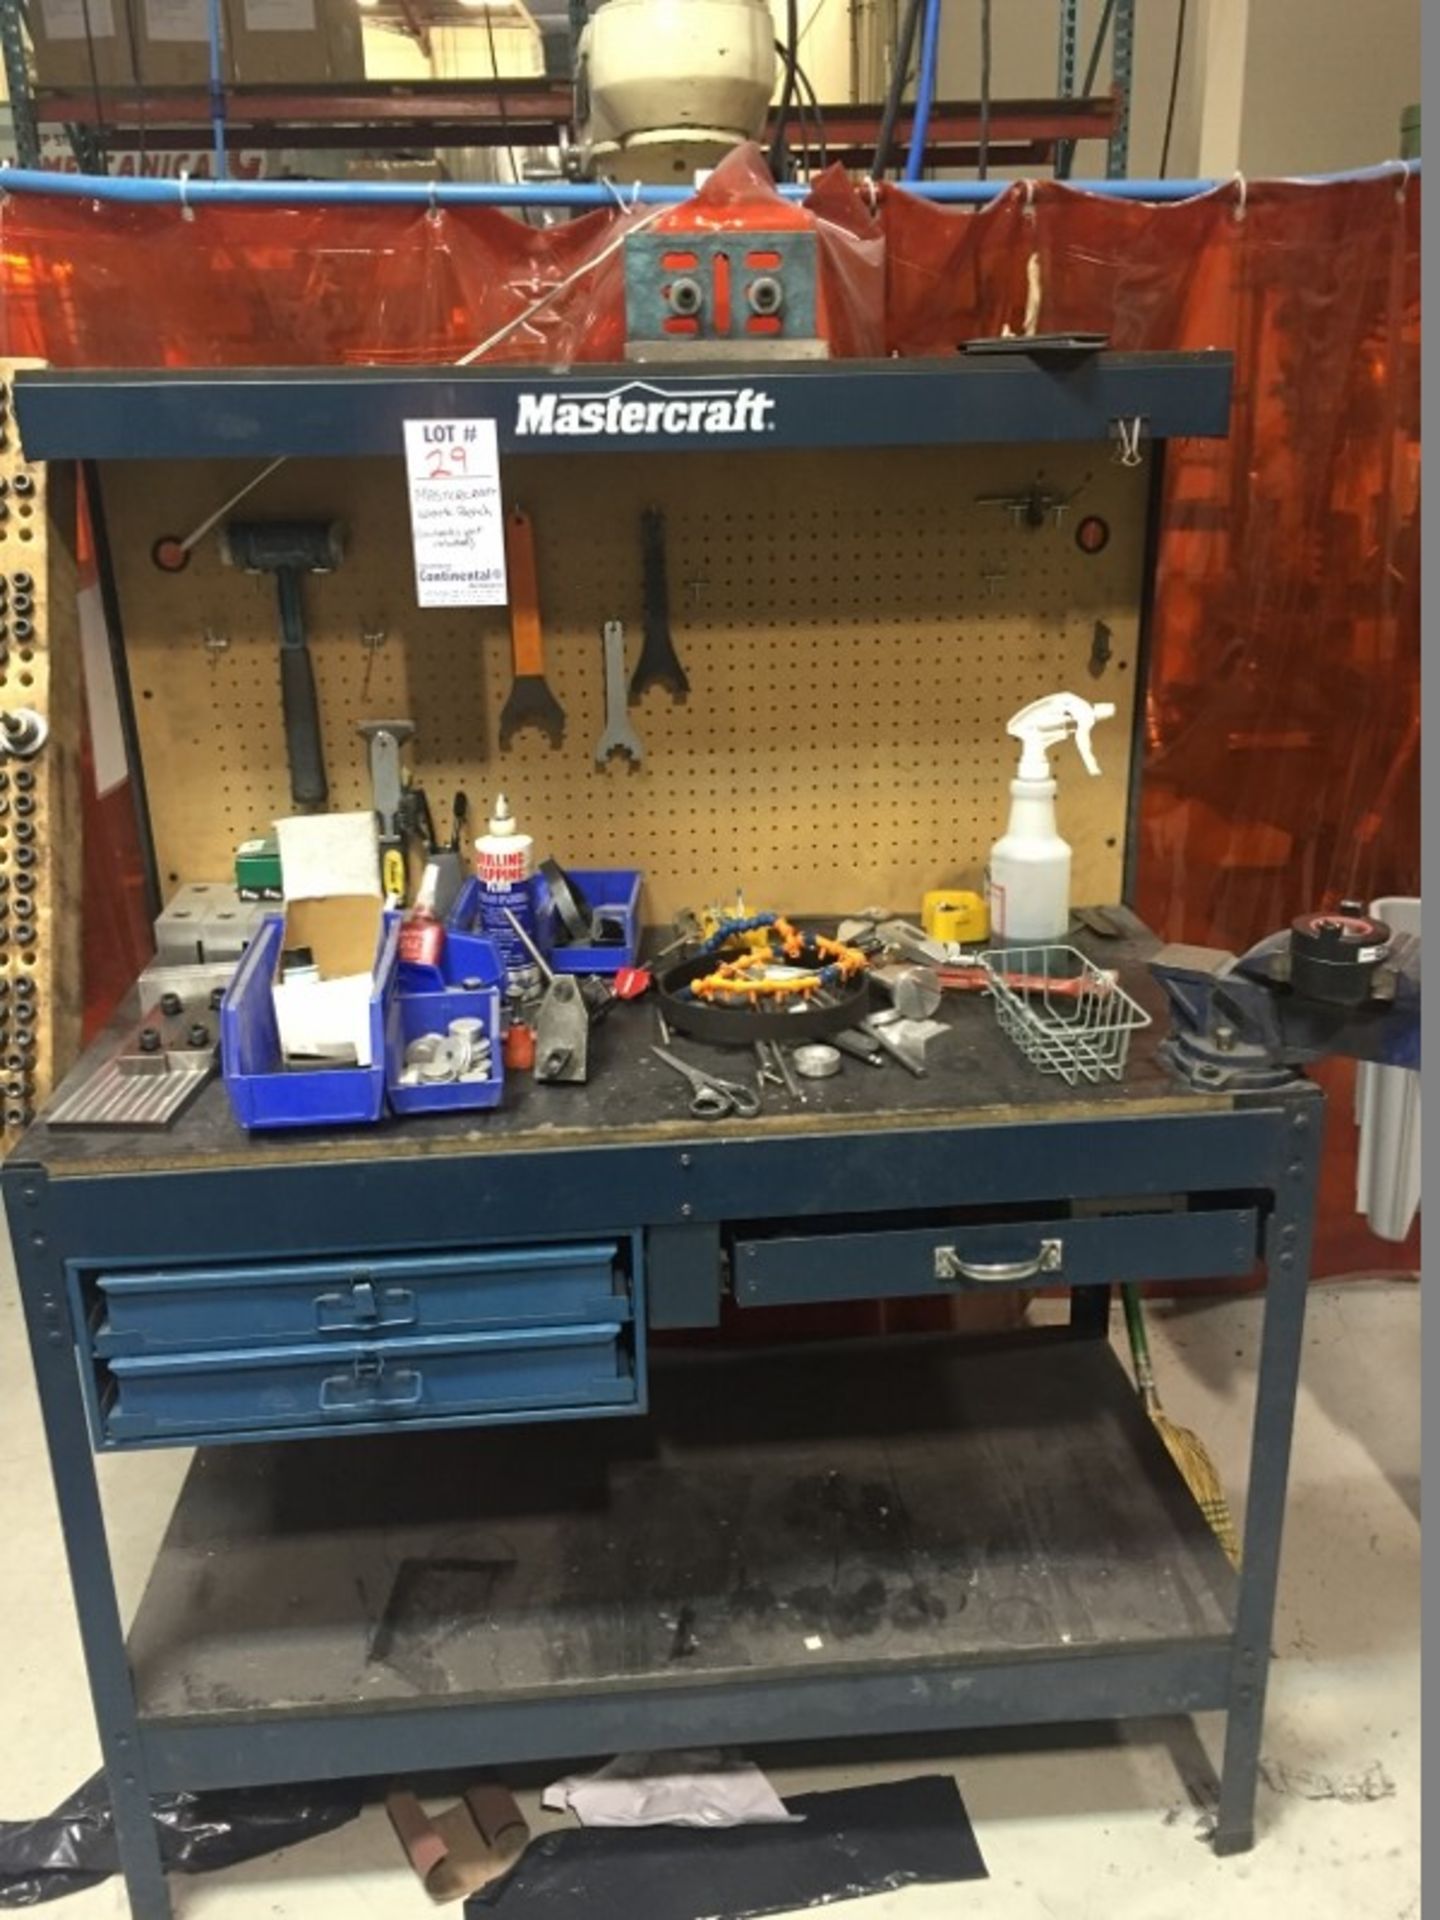 Mastercraft work bench - contents not included